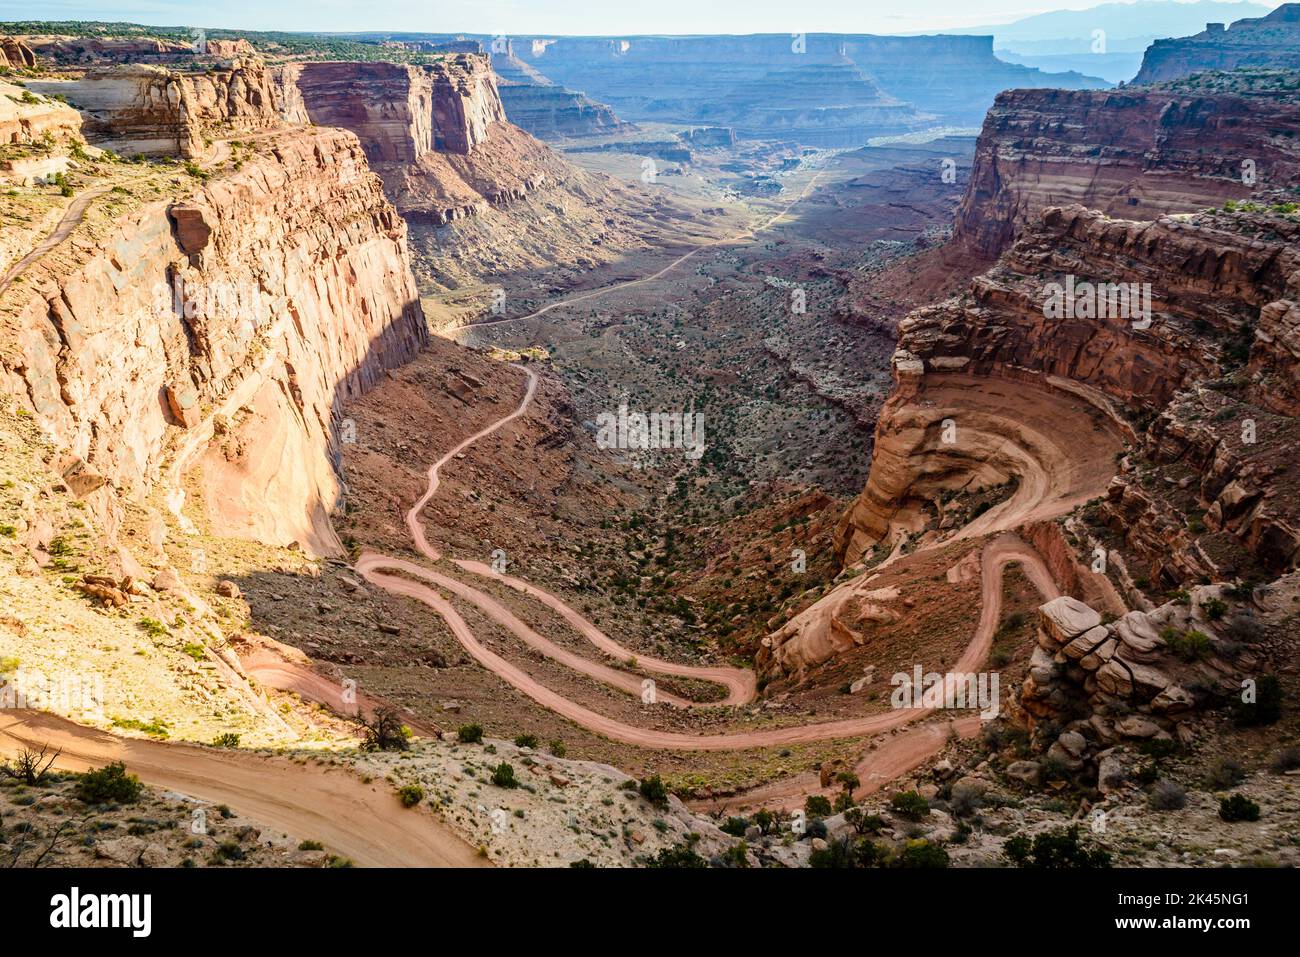 Canyonlands National Park, the view of a zigzag path from the canyon floor up the steep hillside. Stock Photo